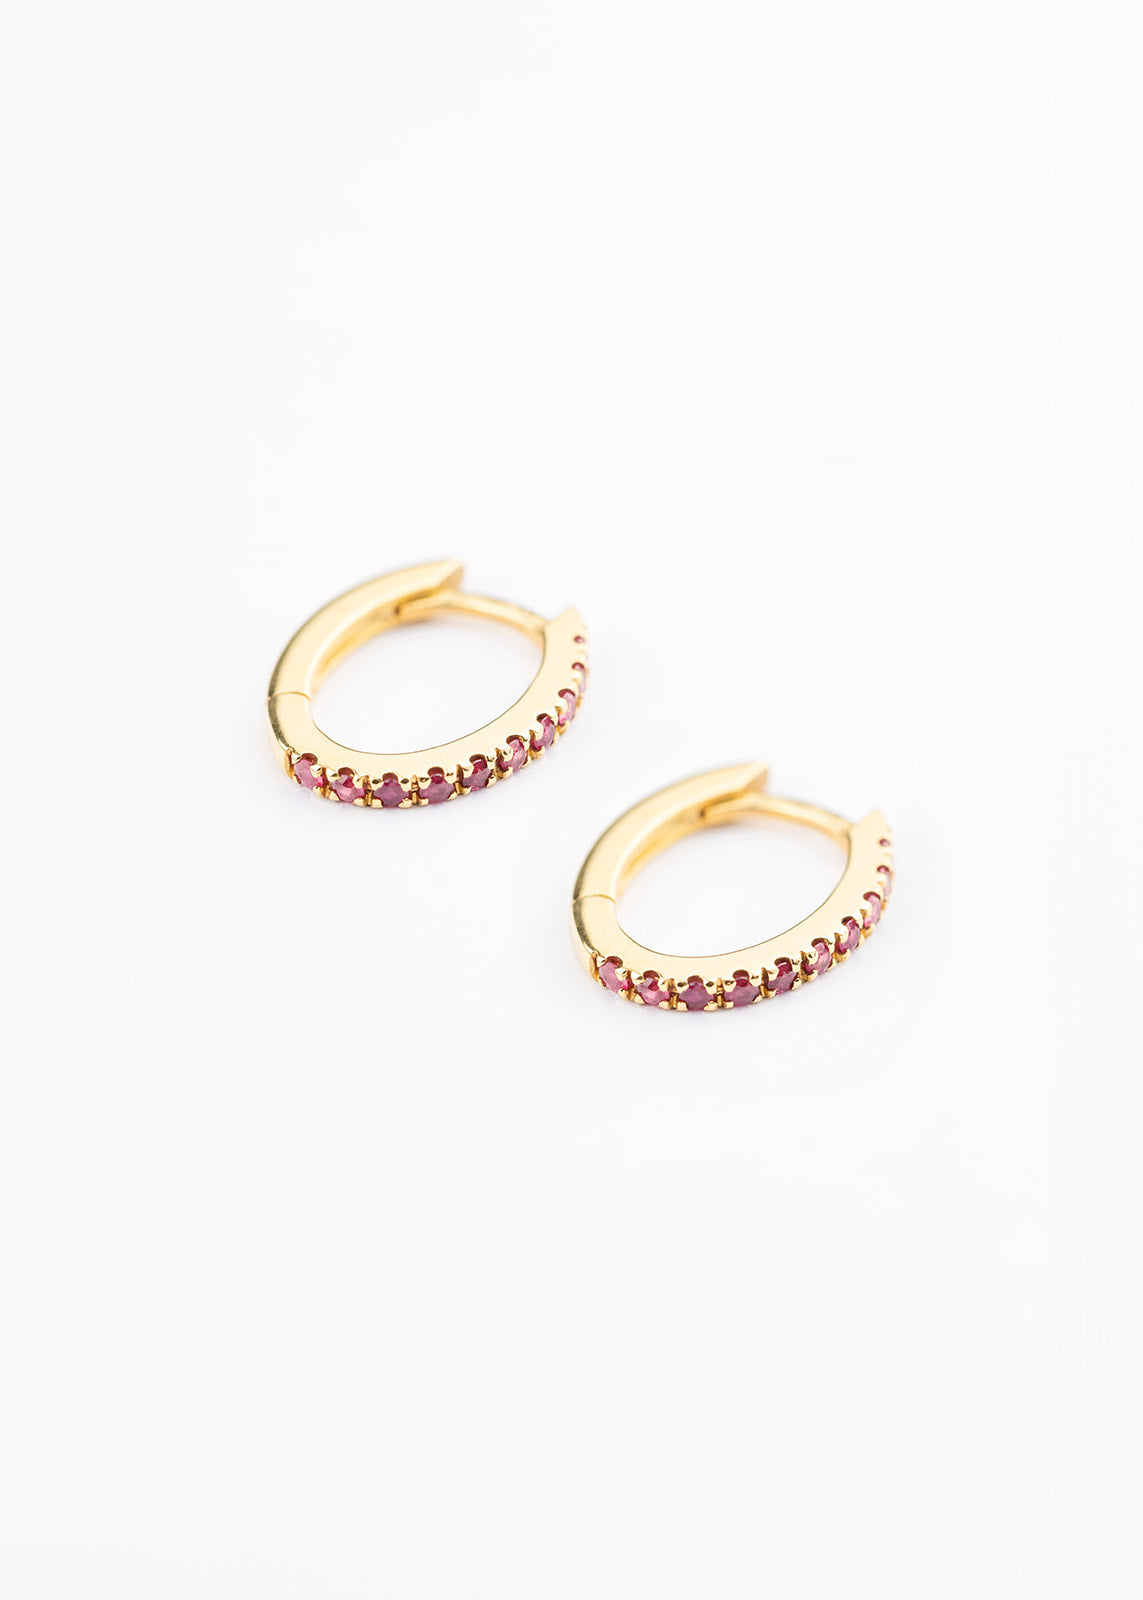 18kt Yellow Gold Oval Huggies with Rubies